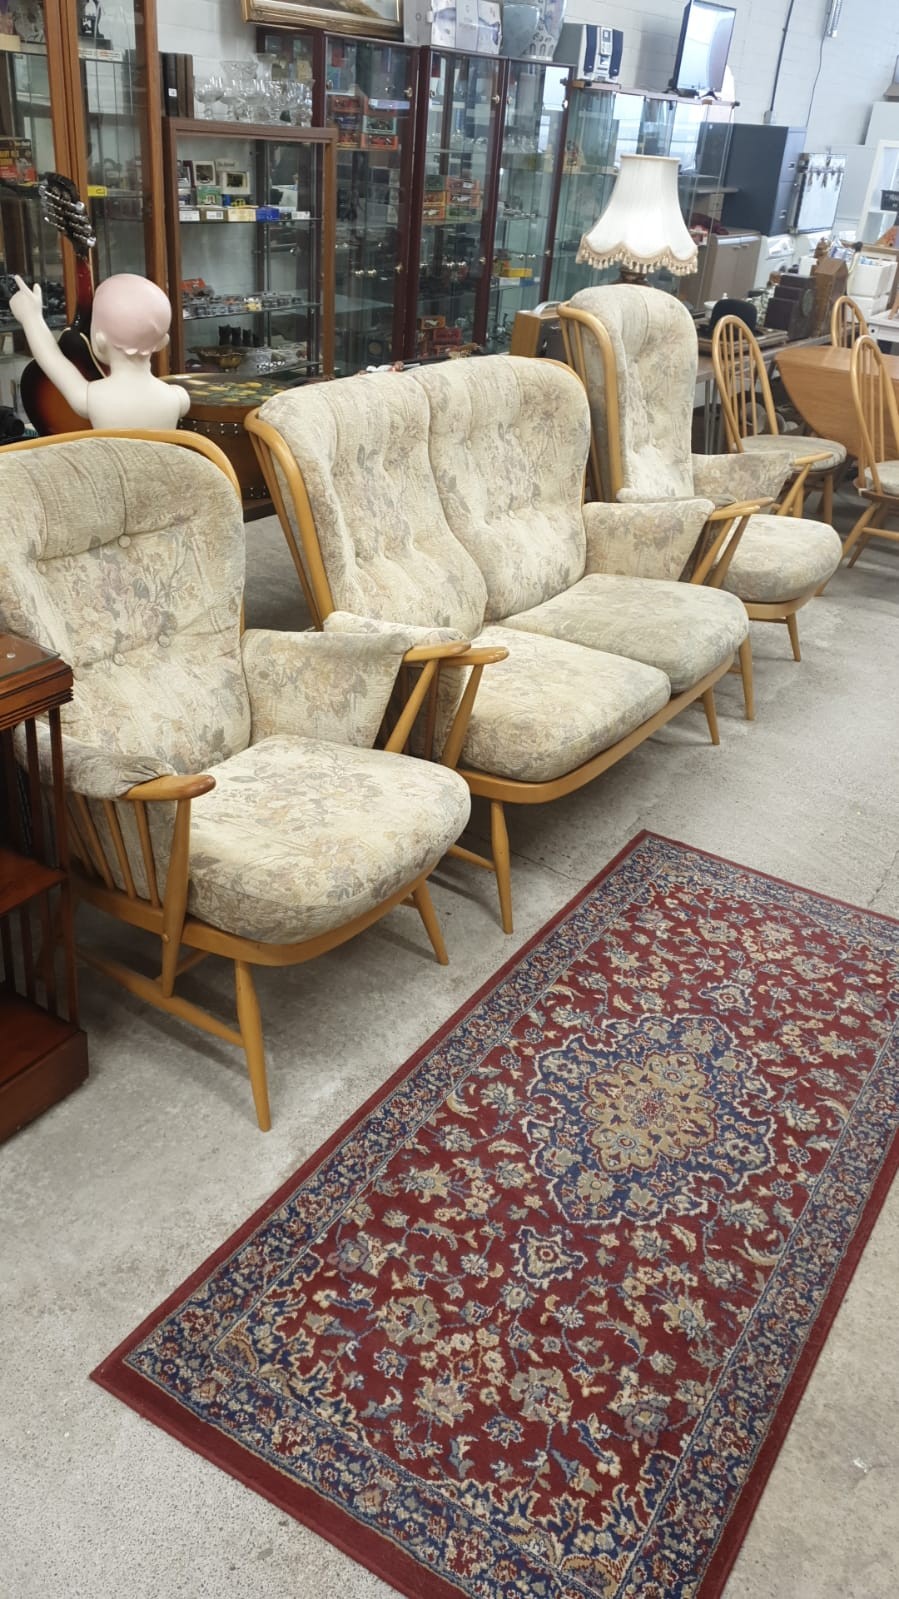 Ercol Blonde wood 3 piece suite with original cushions.